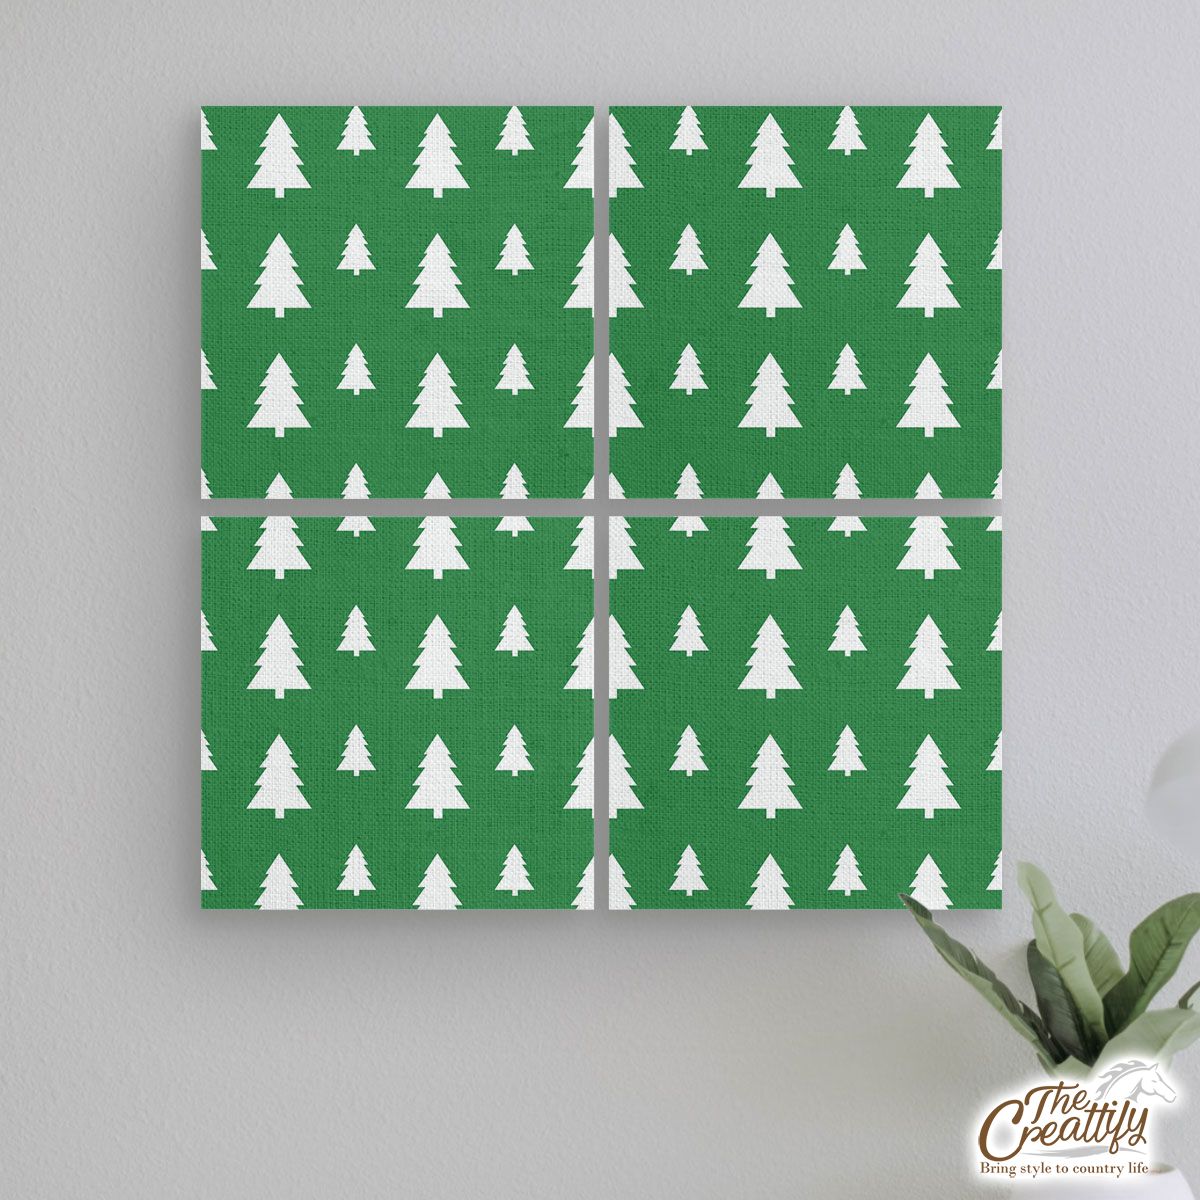 Green And White Christmas Tree Mural With Frame